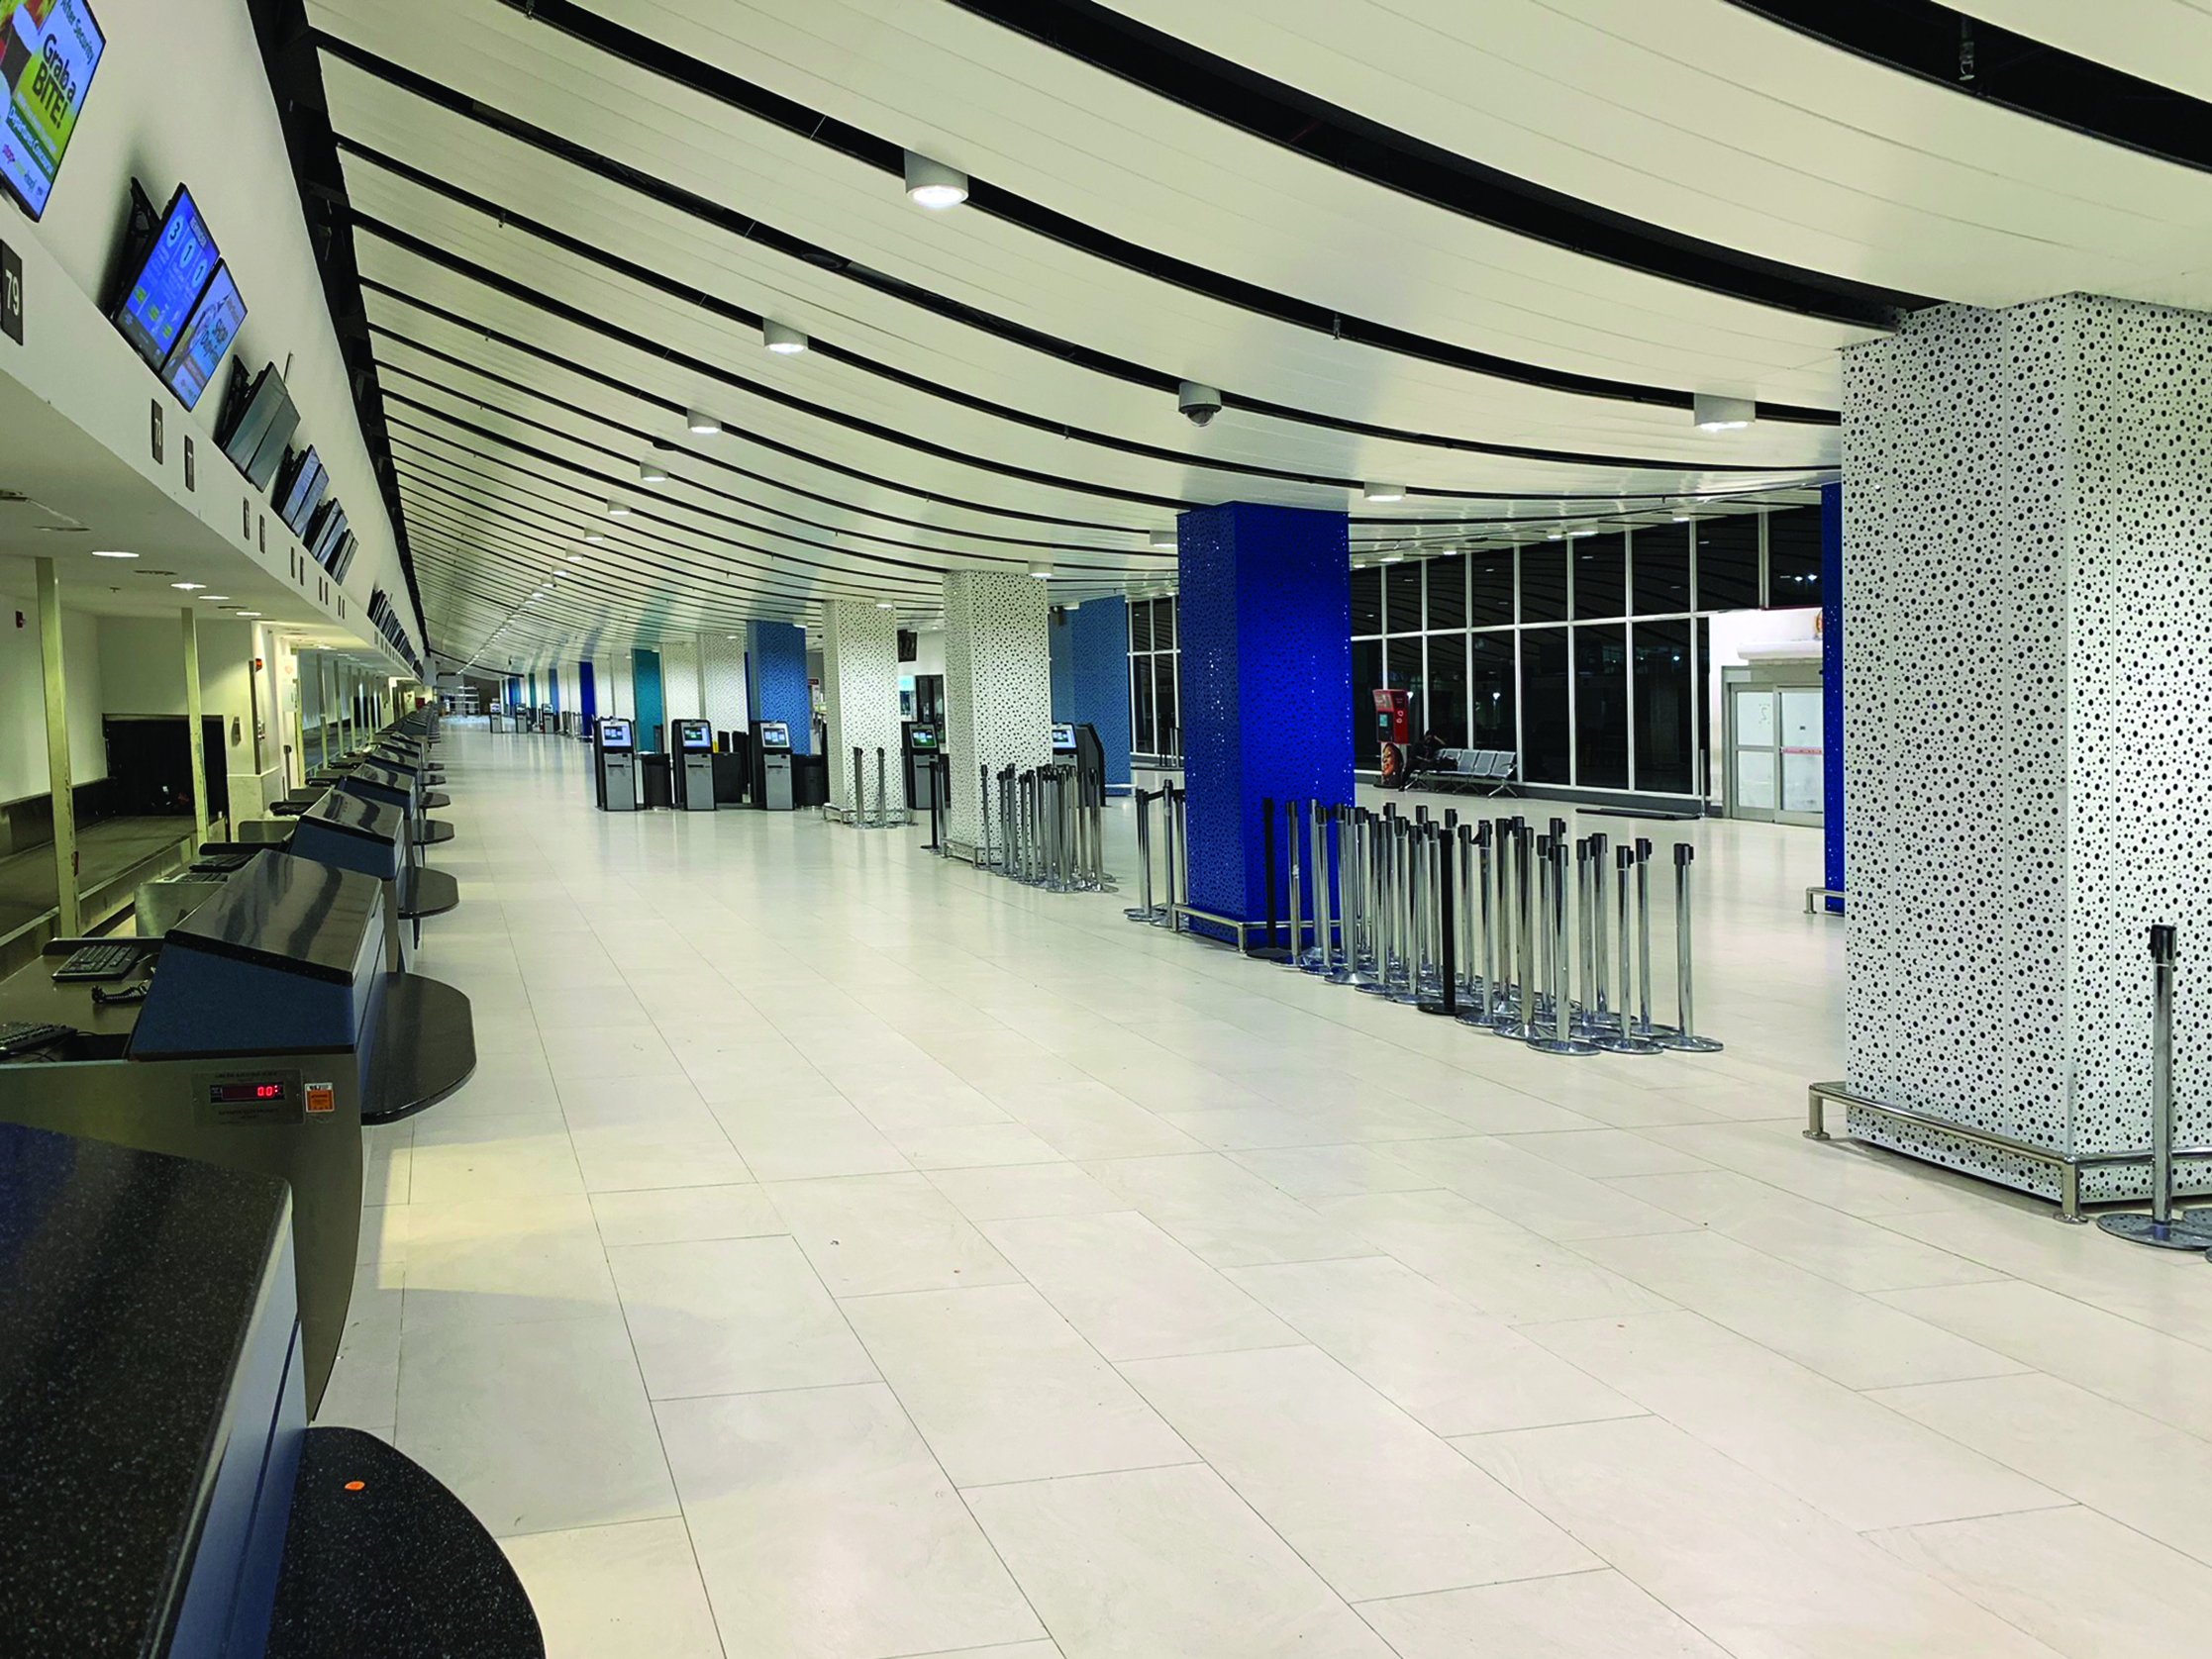 MBJ Airport's Check-in terminal